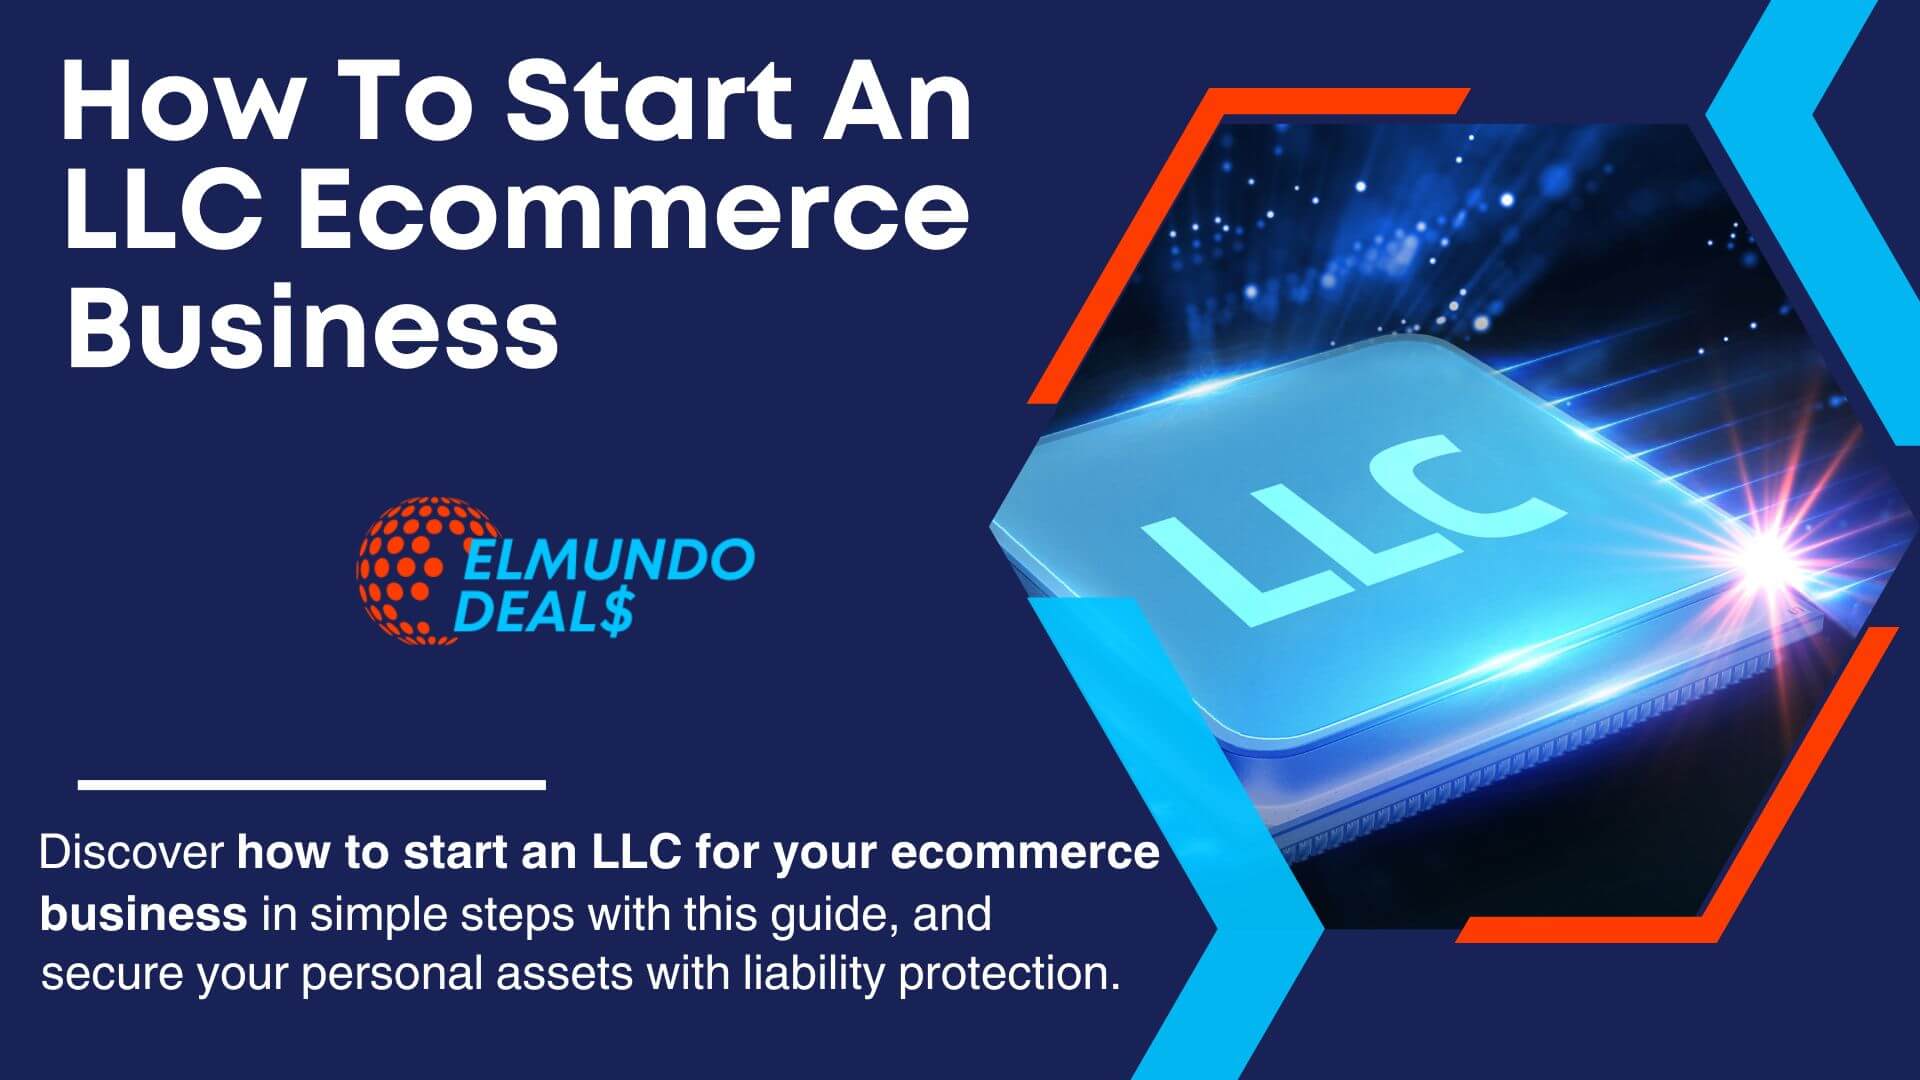 How To Start An LLC For Ecommerce Business In 9 Easy Steps - 2023